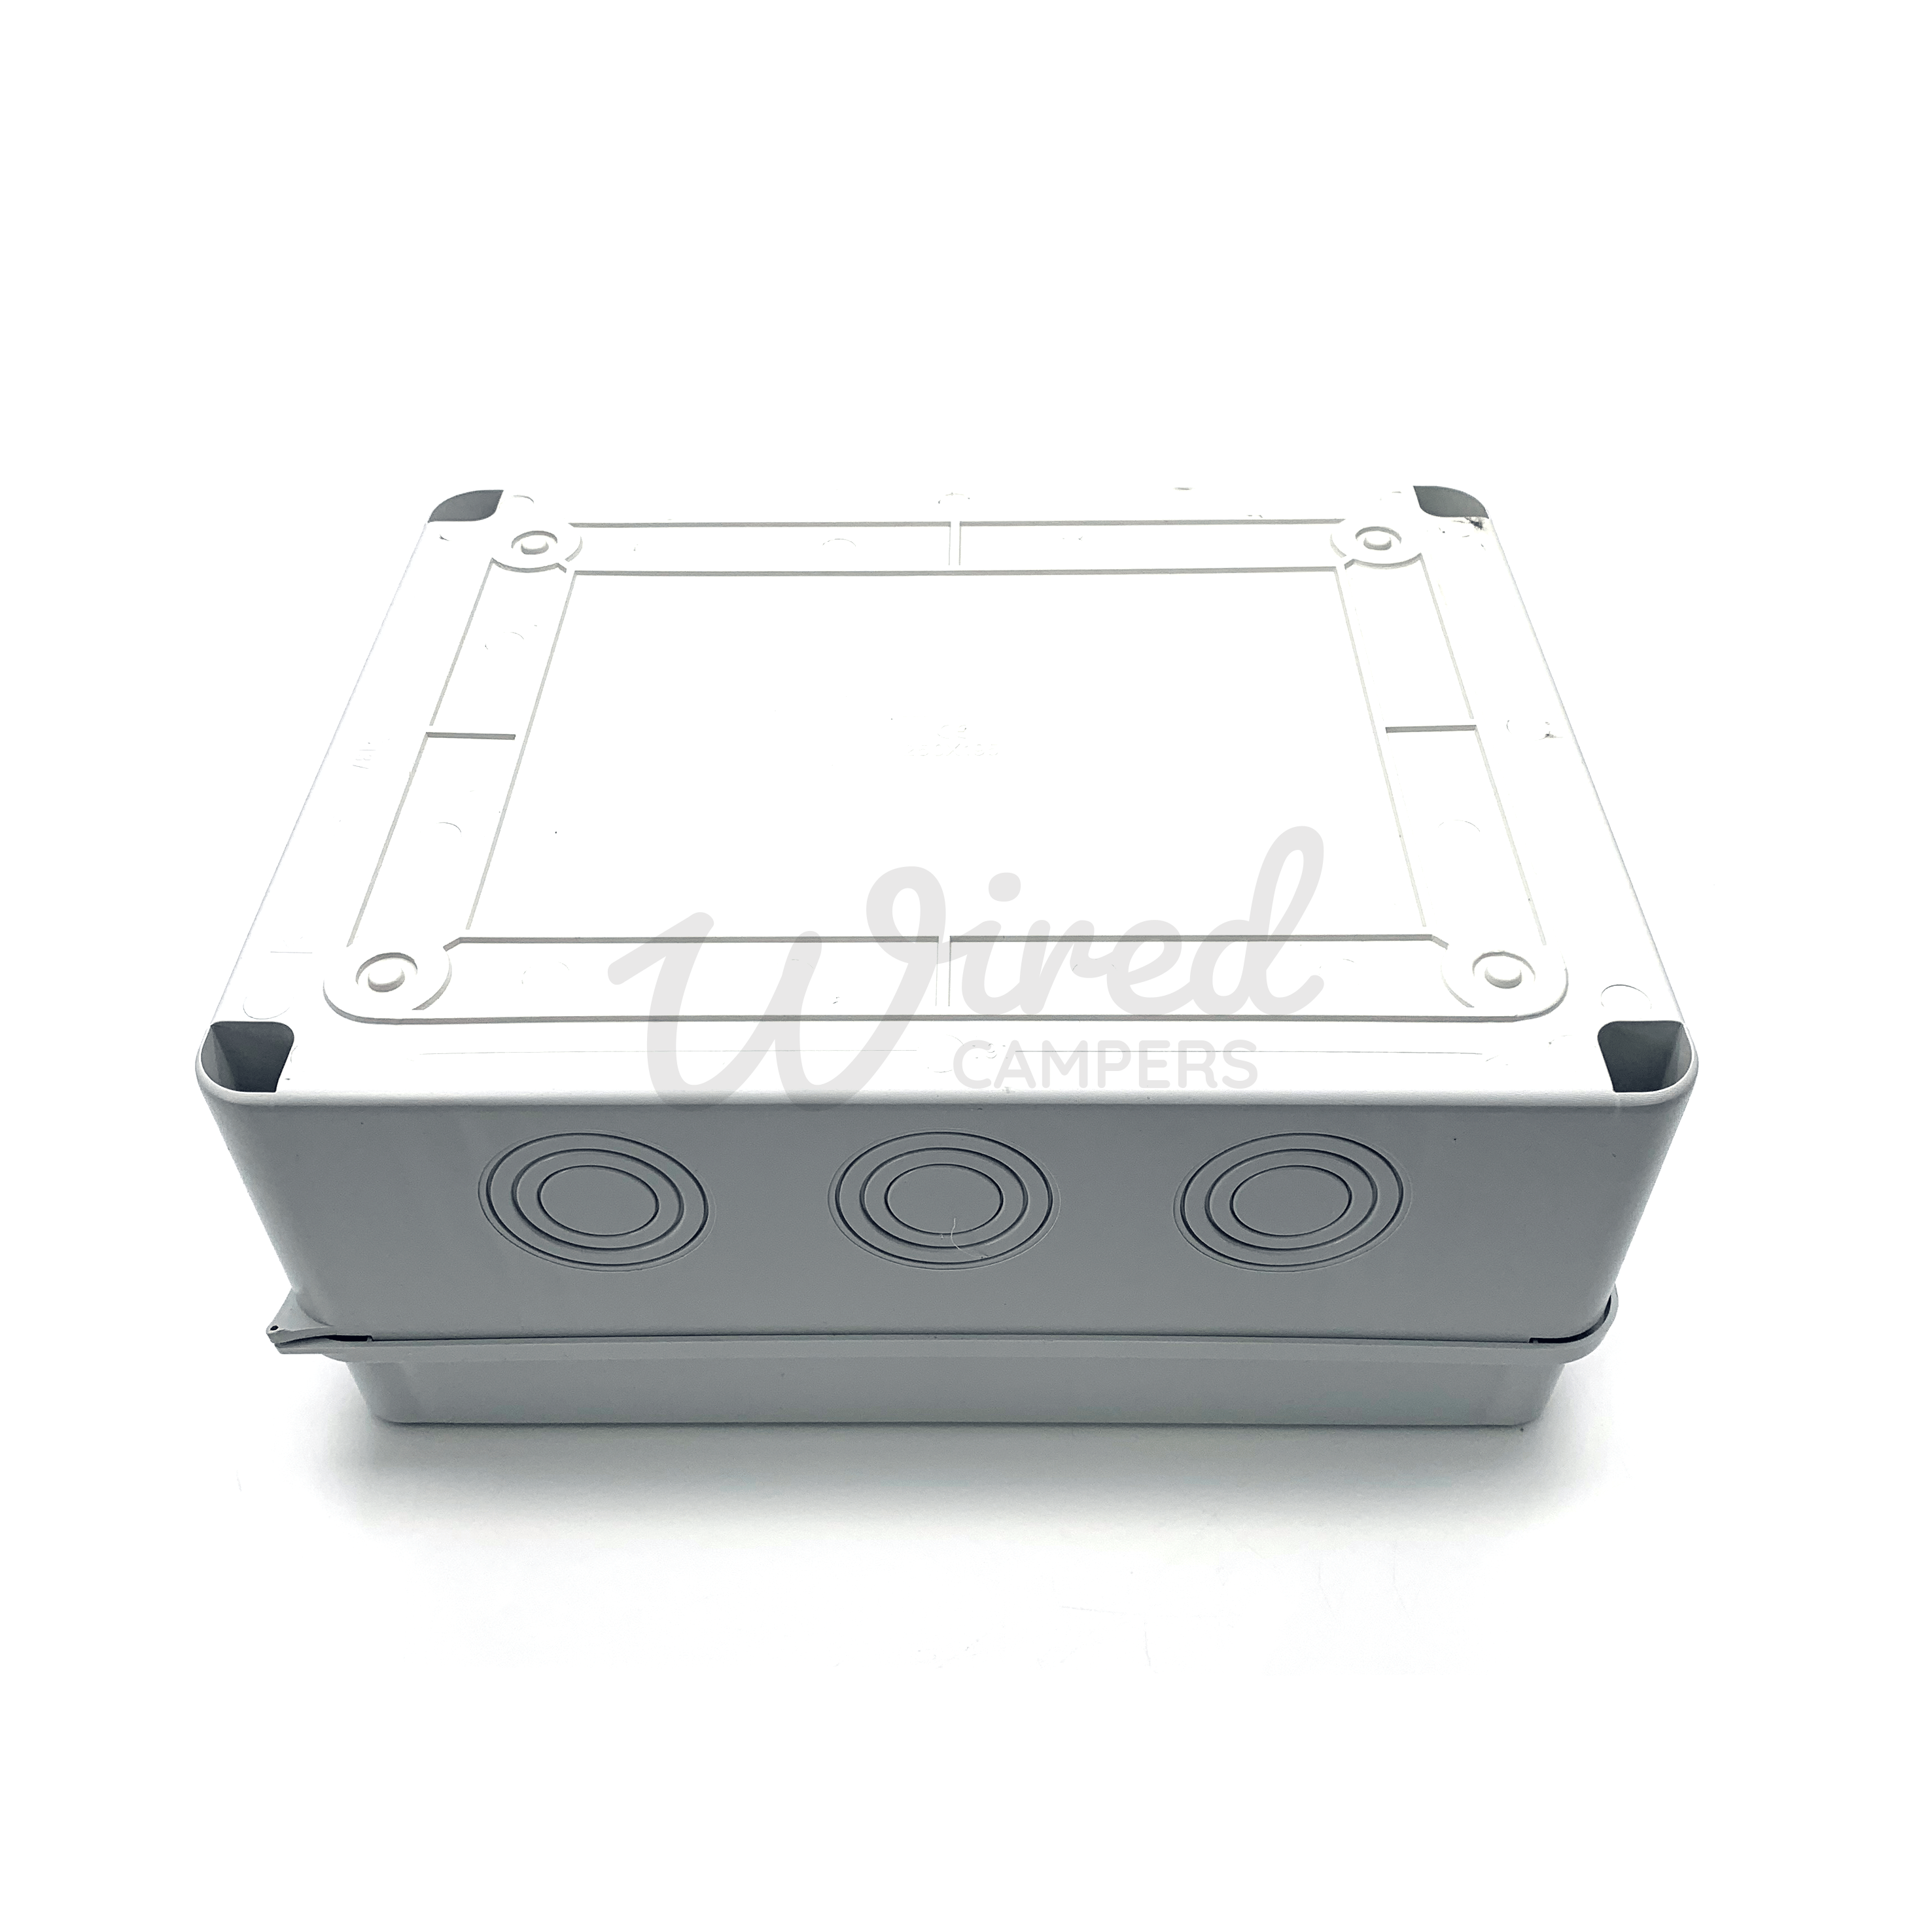 Wired Campers Limited 12 Way RCD/MCB Mains Camper Van Consumer Unit Plastic Enclosure - IP65